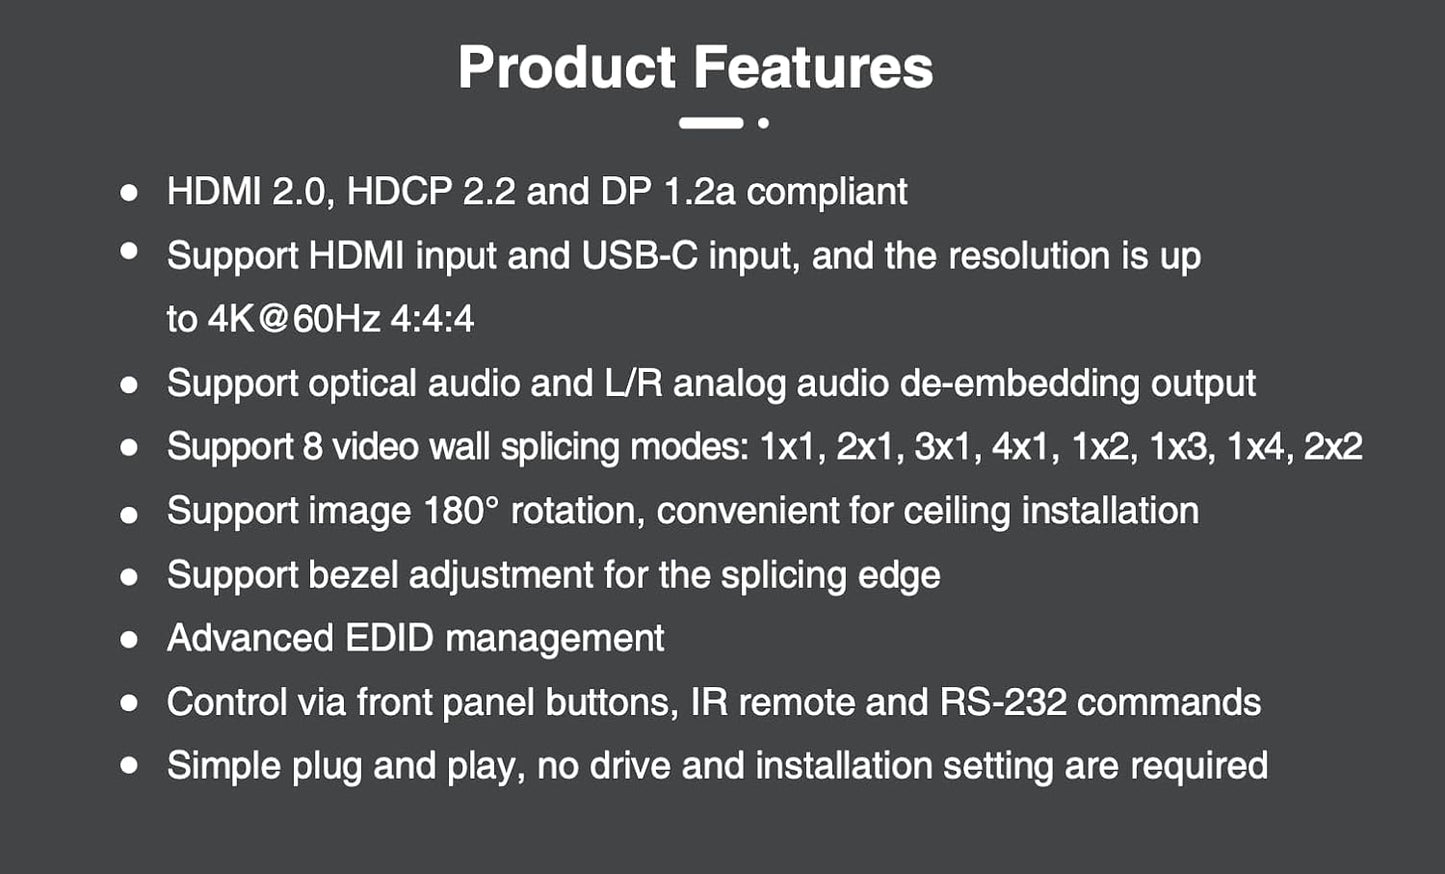 1 input 4 output - 2x2 Video Wall Processor for 4 Monitors - 4K60hz